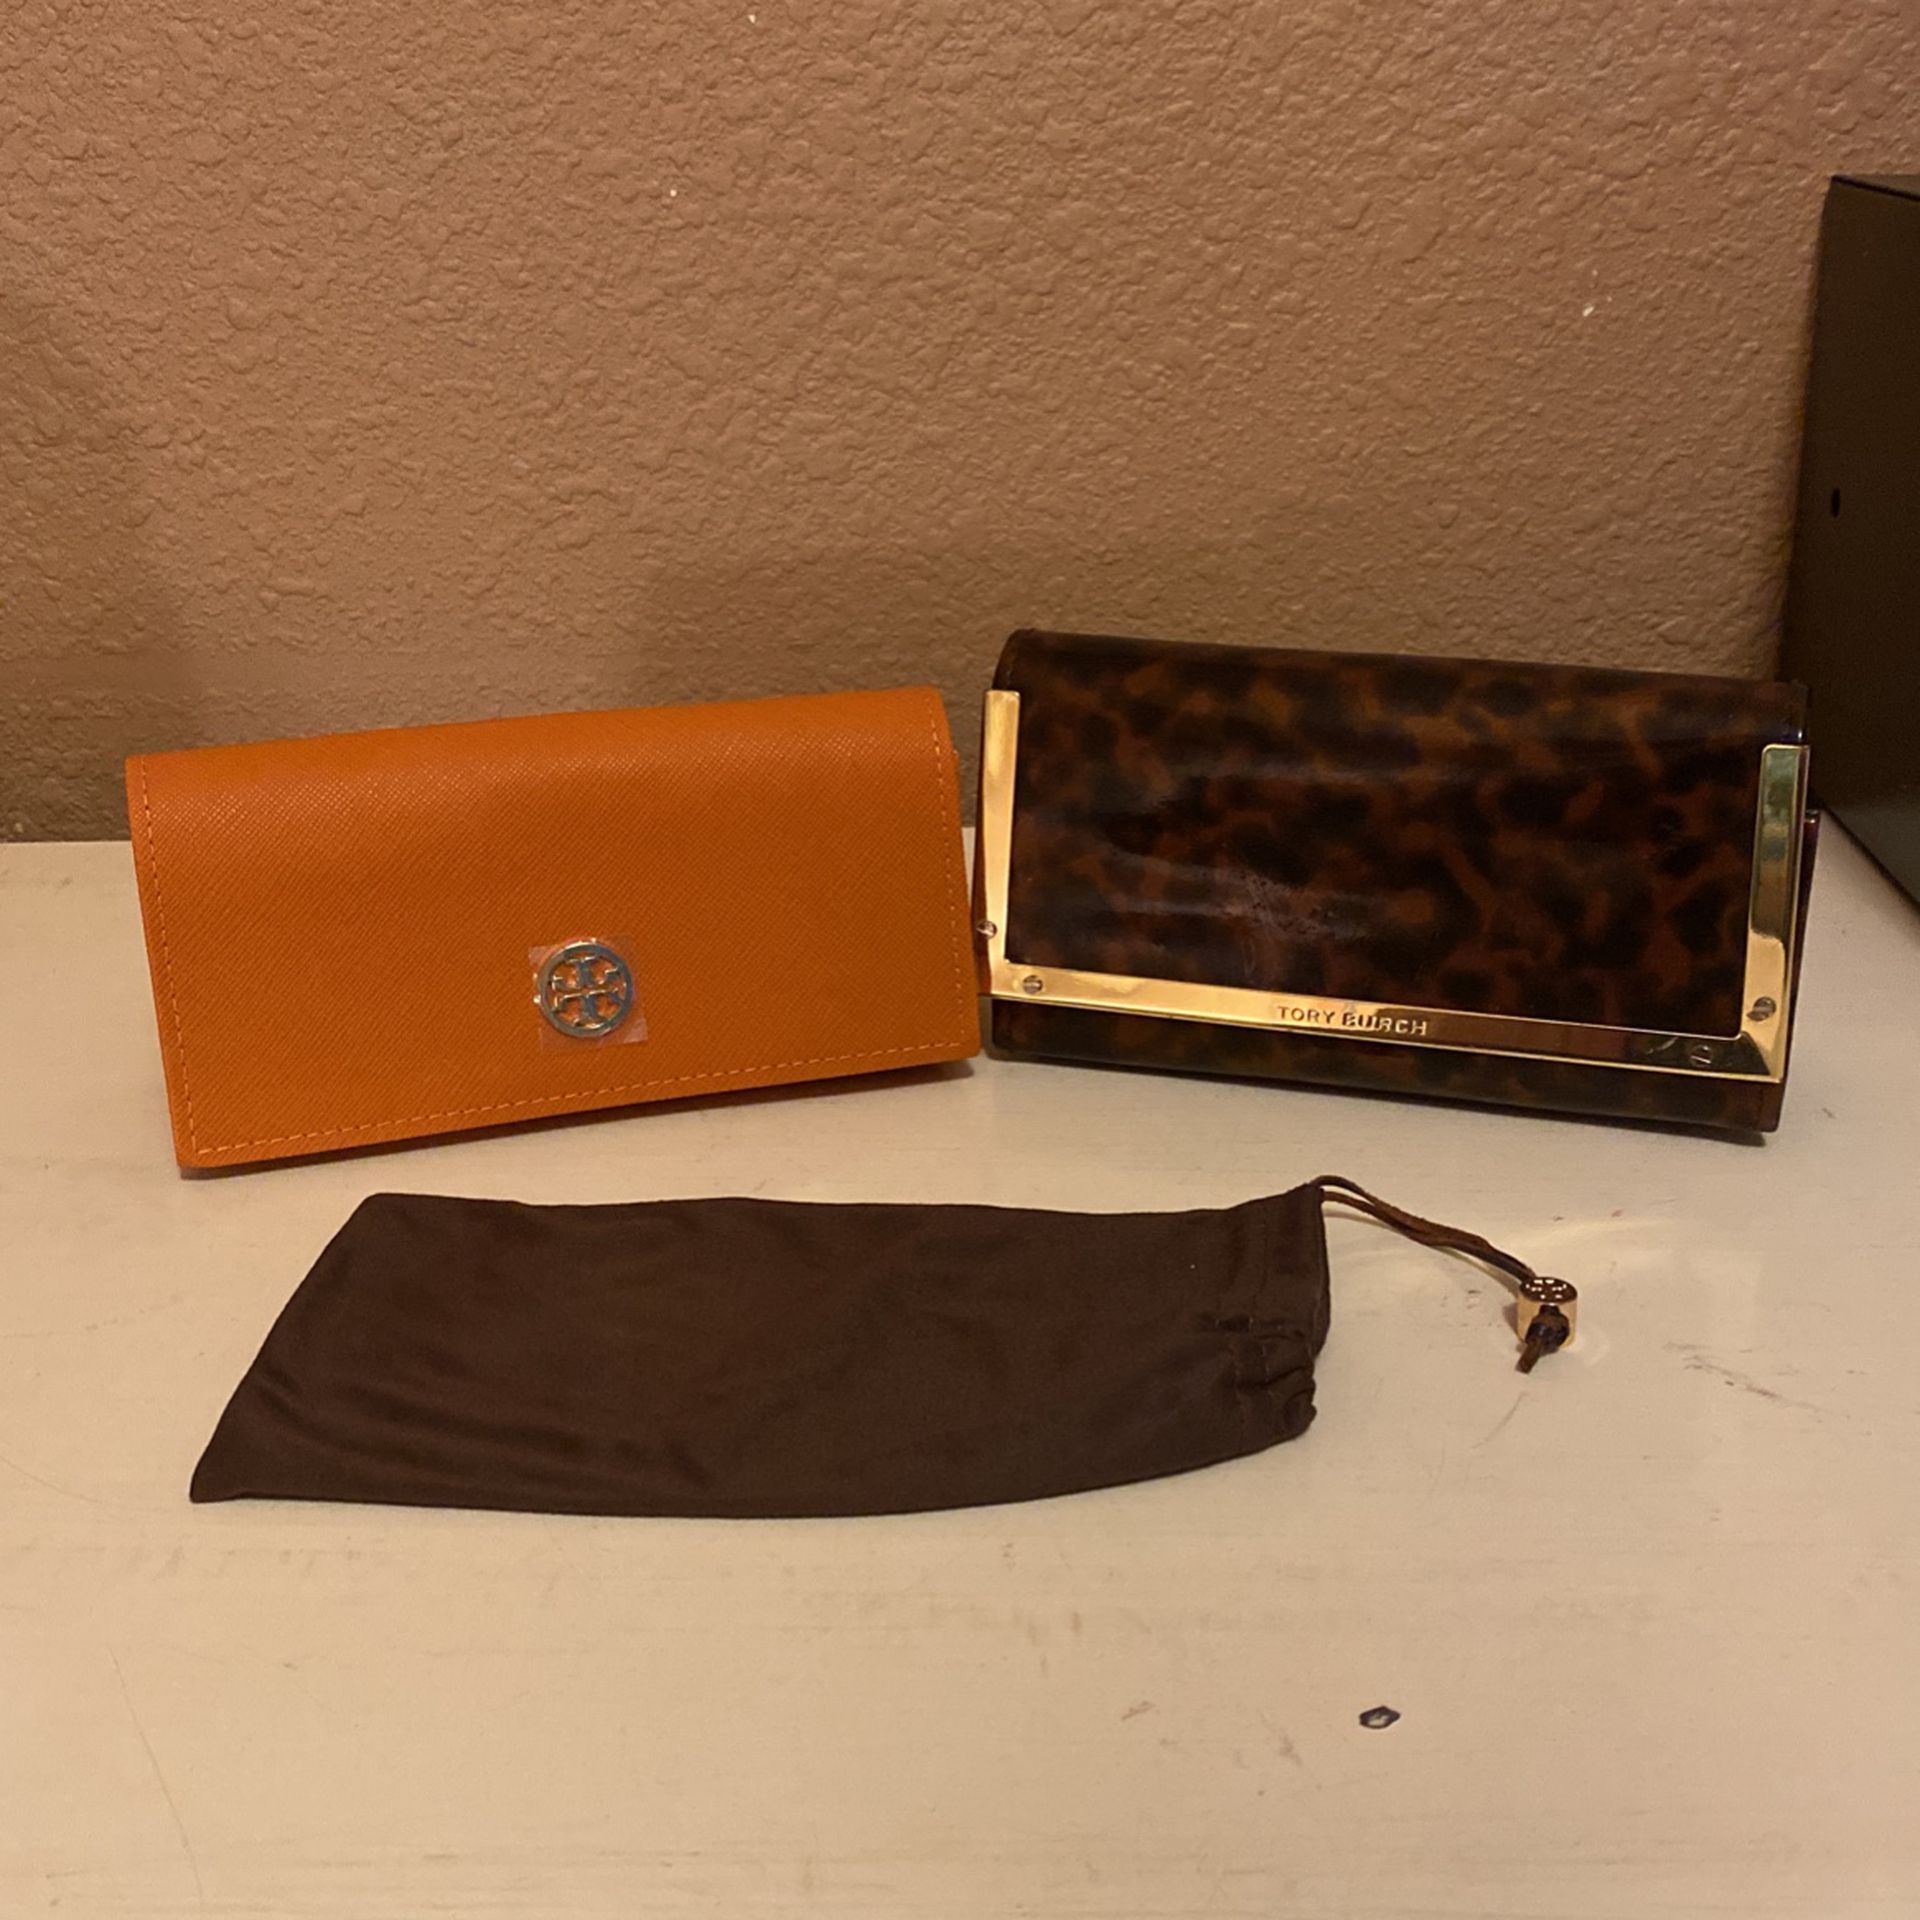 Tory Burch Authentic New Sunglasse Cases Velcro Closoure With Pouch $12 Each Firm C My Page Ty 